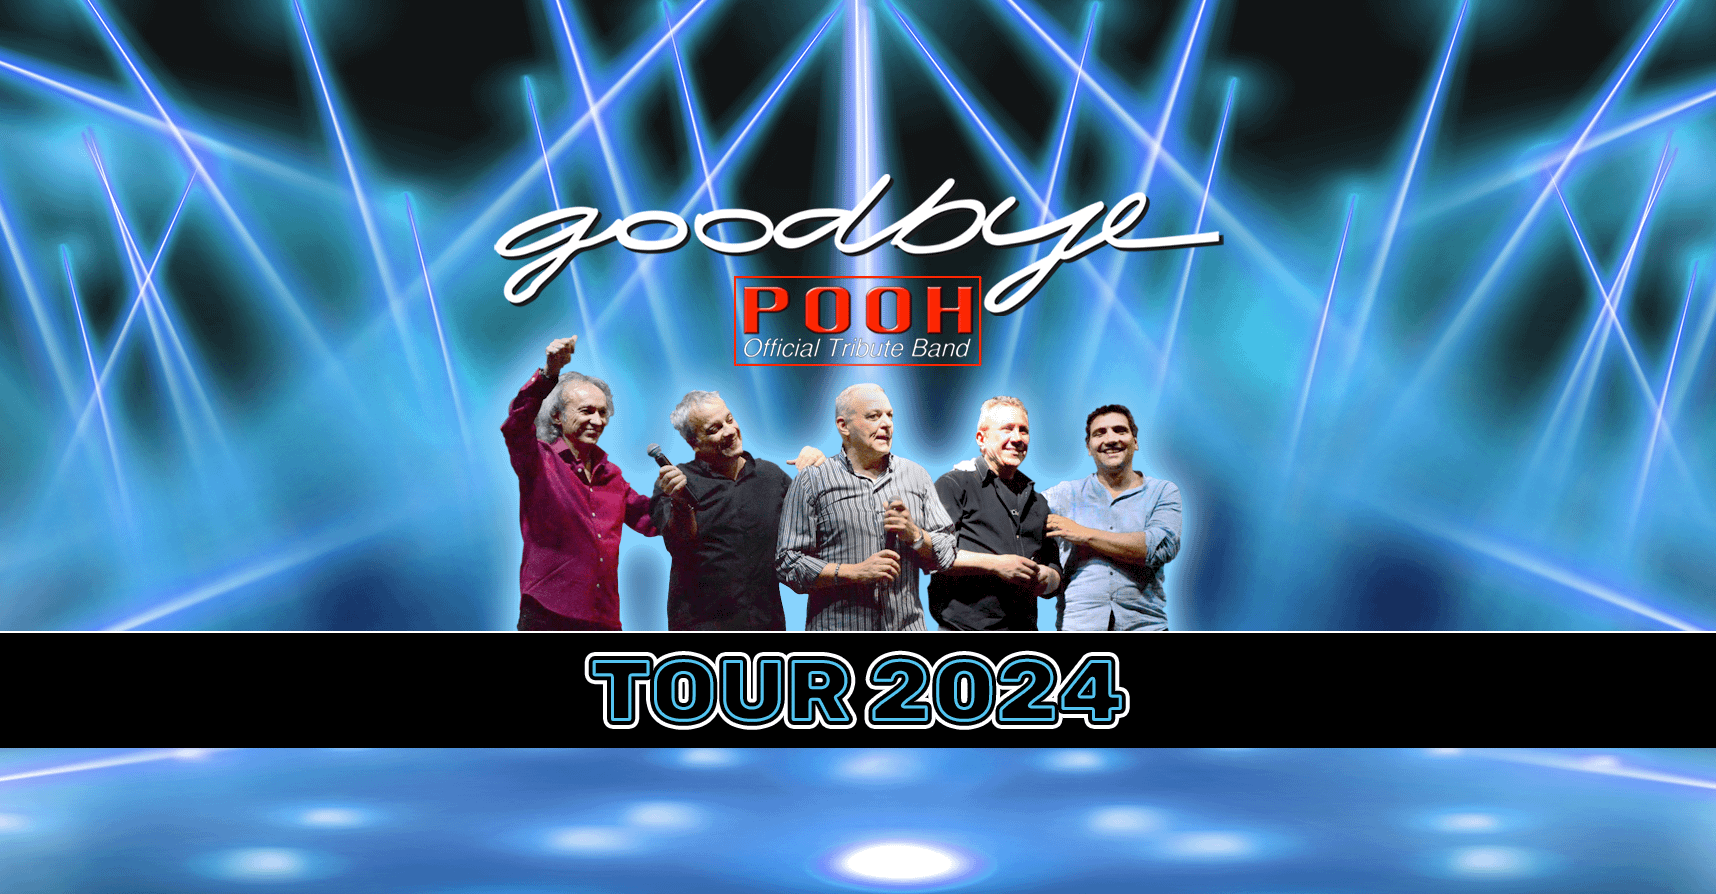 Goodbye Pooh Official Tribute Band 9804